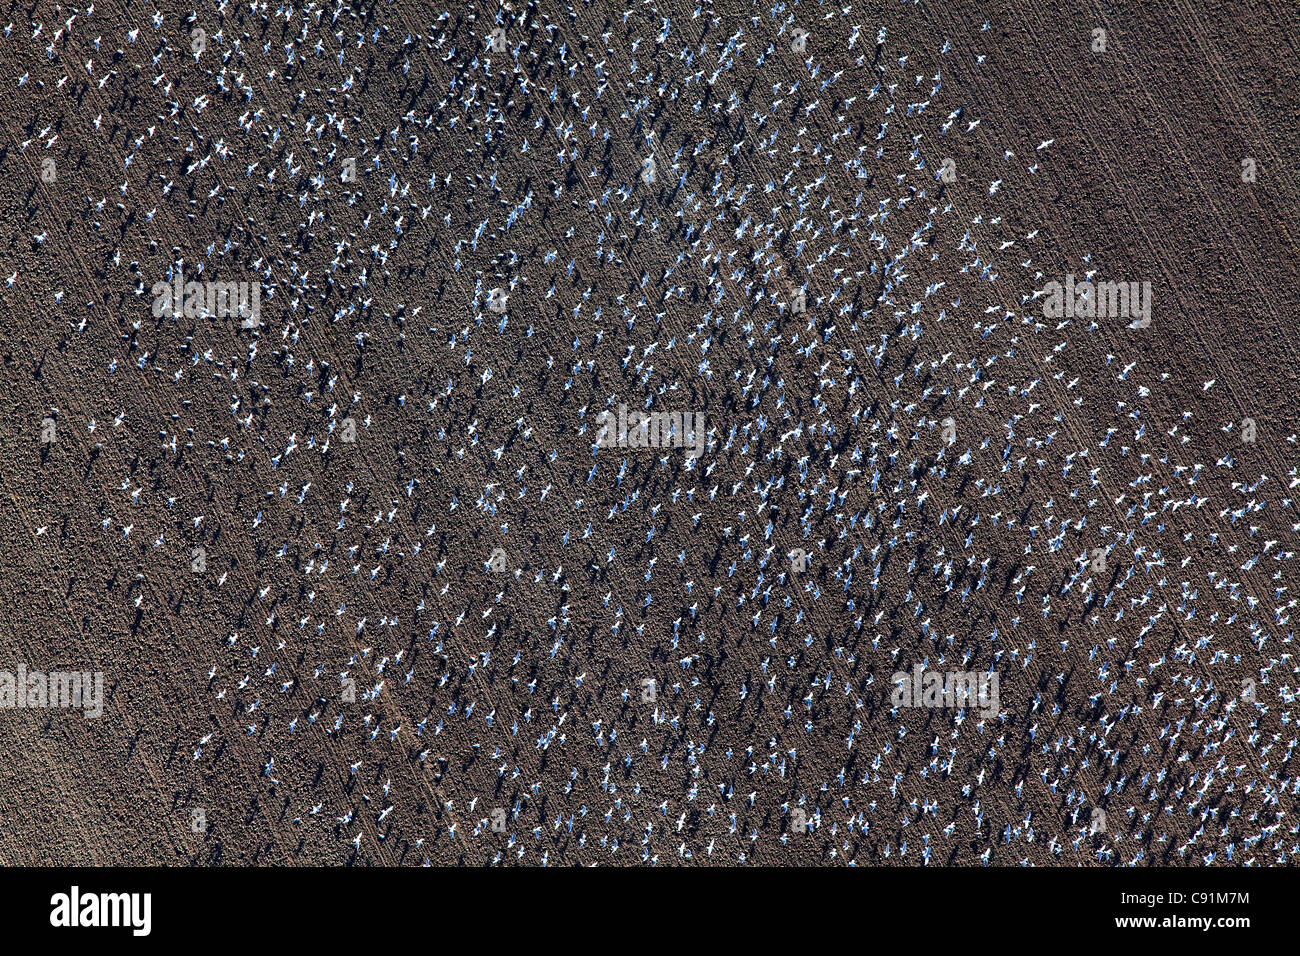 Aerial of a large flock of birds over a freshly ploughed field, Lower Saxony, Germany Stock Photo